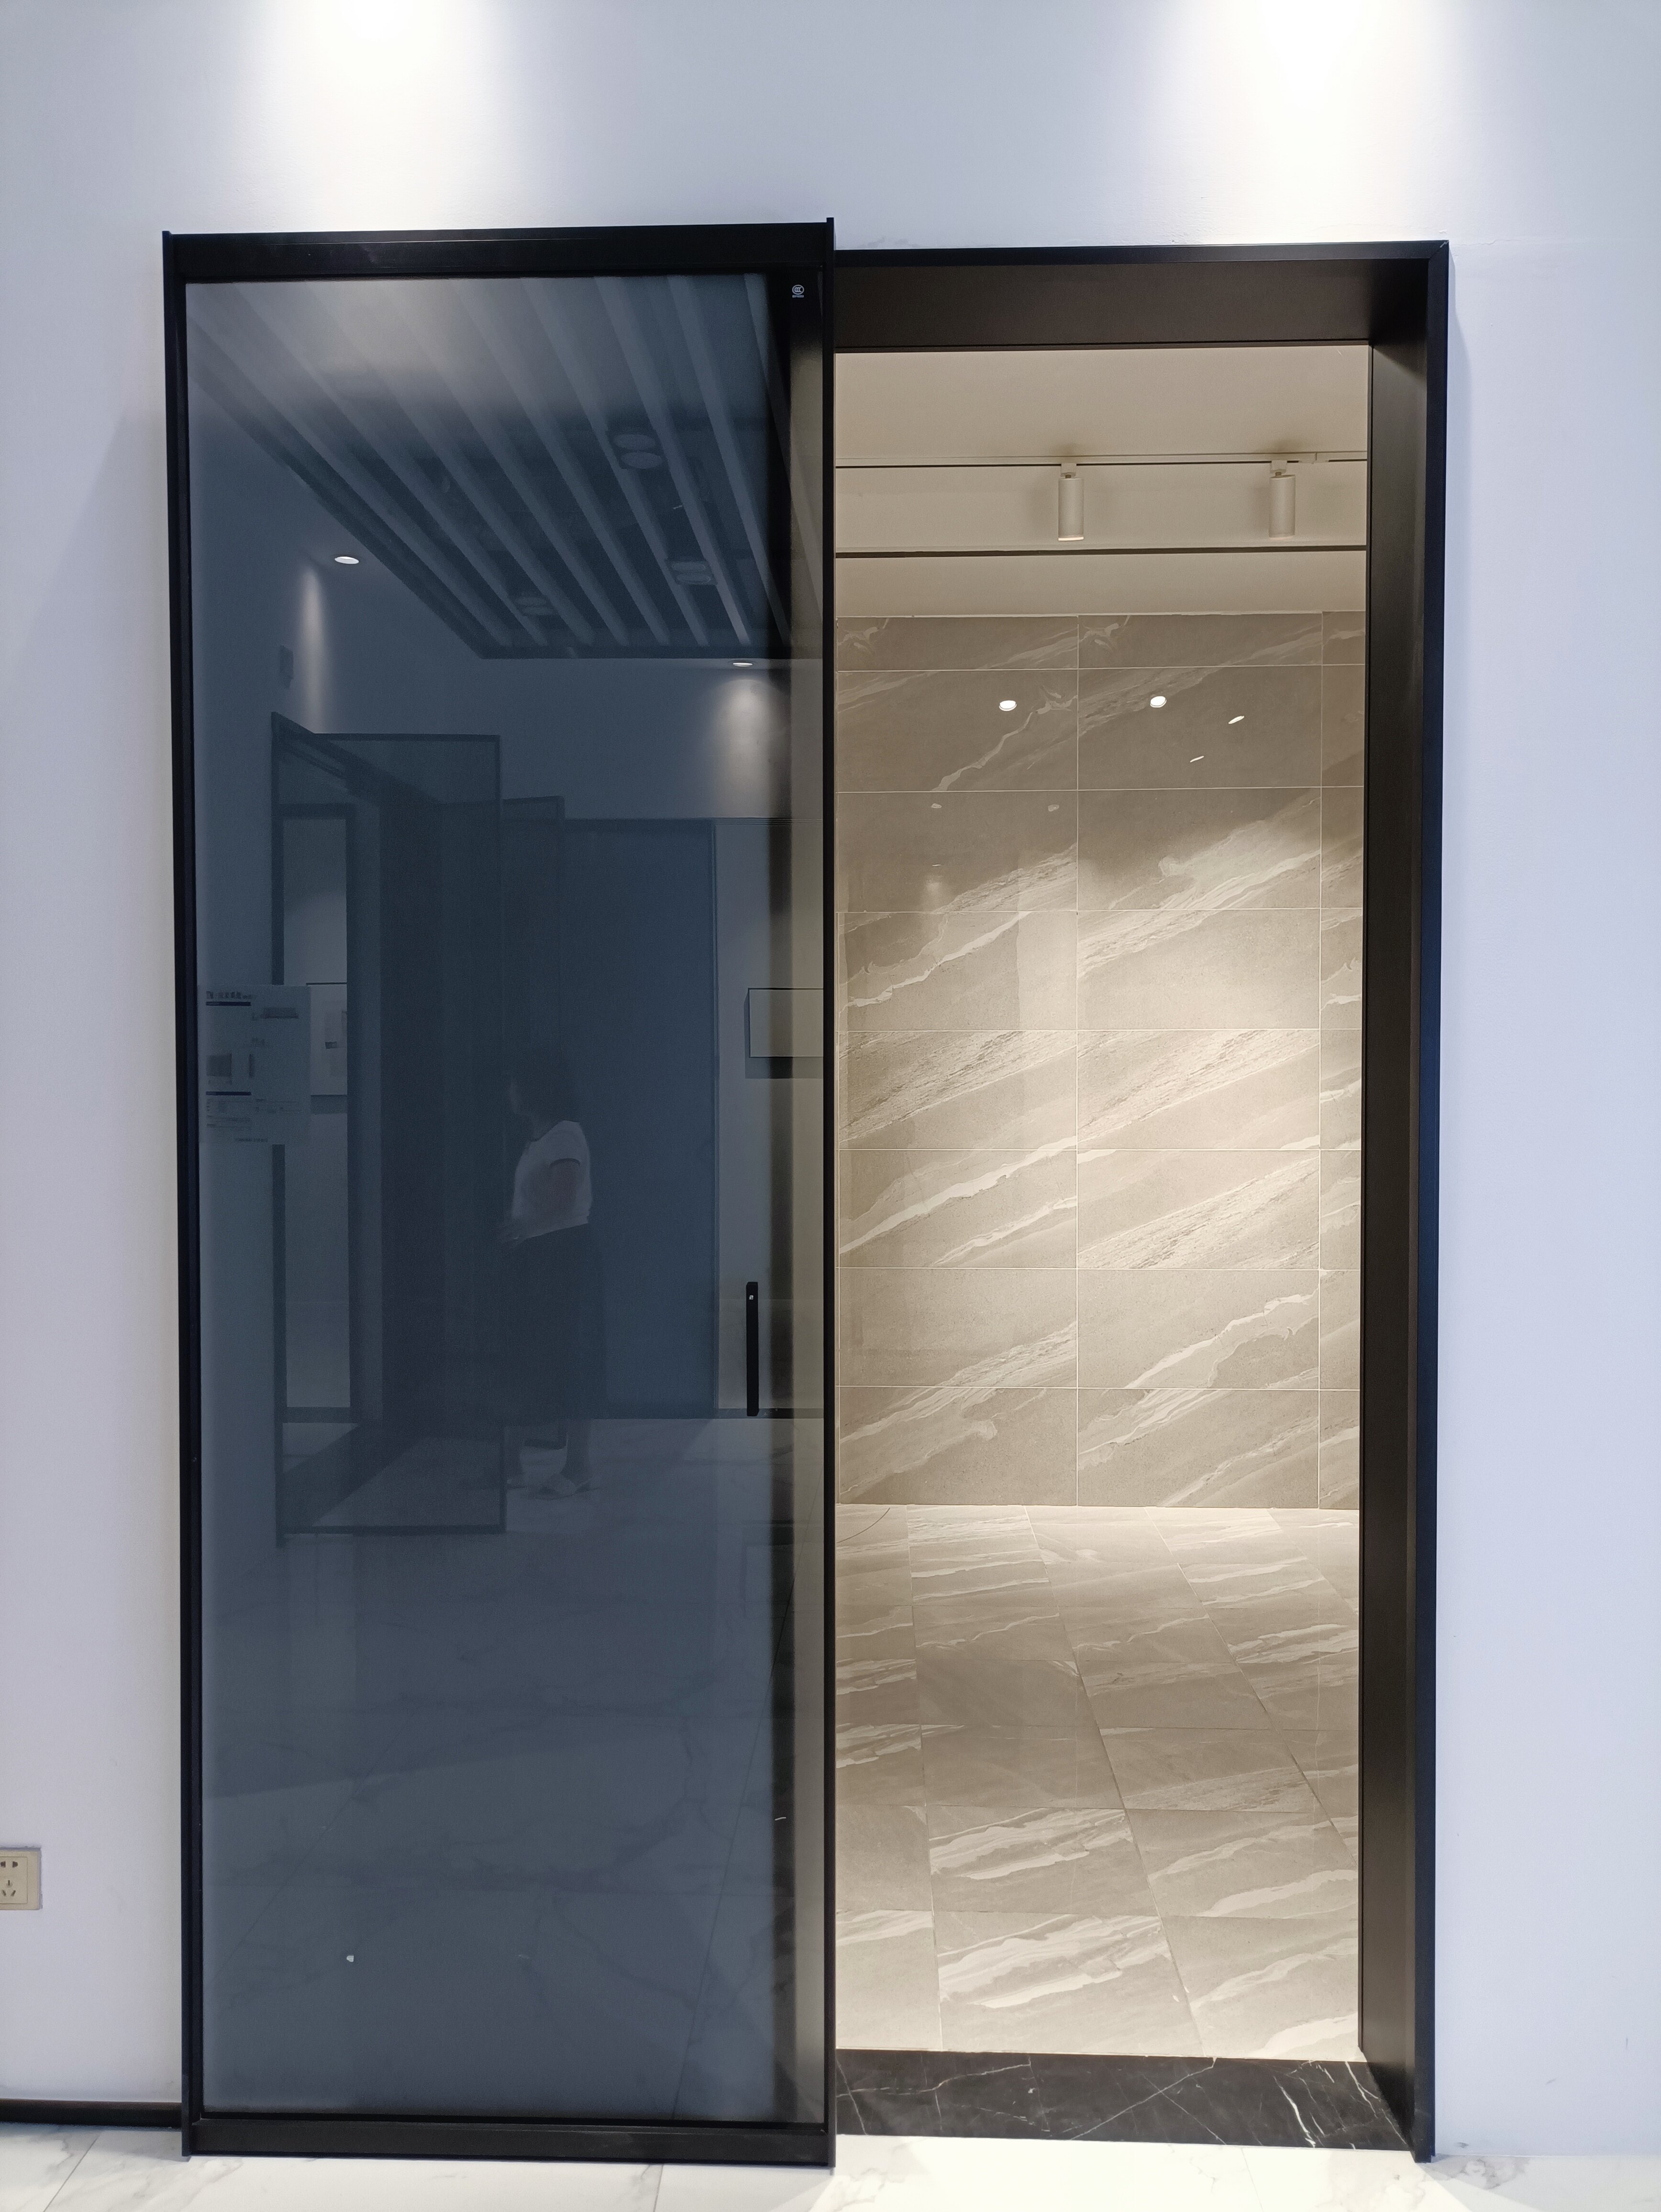 Perfect System Ghost Door Application uses an aluminum profile combination